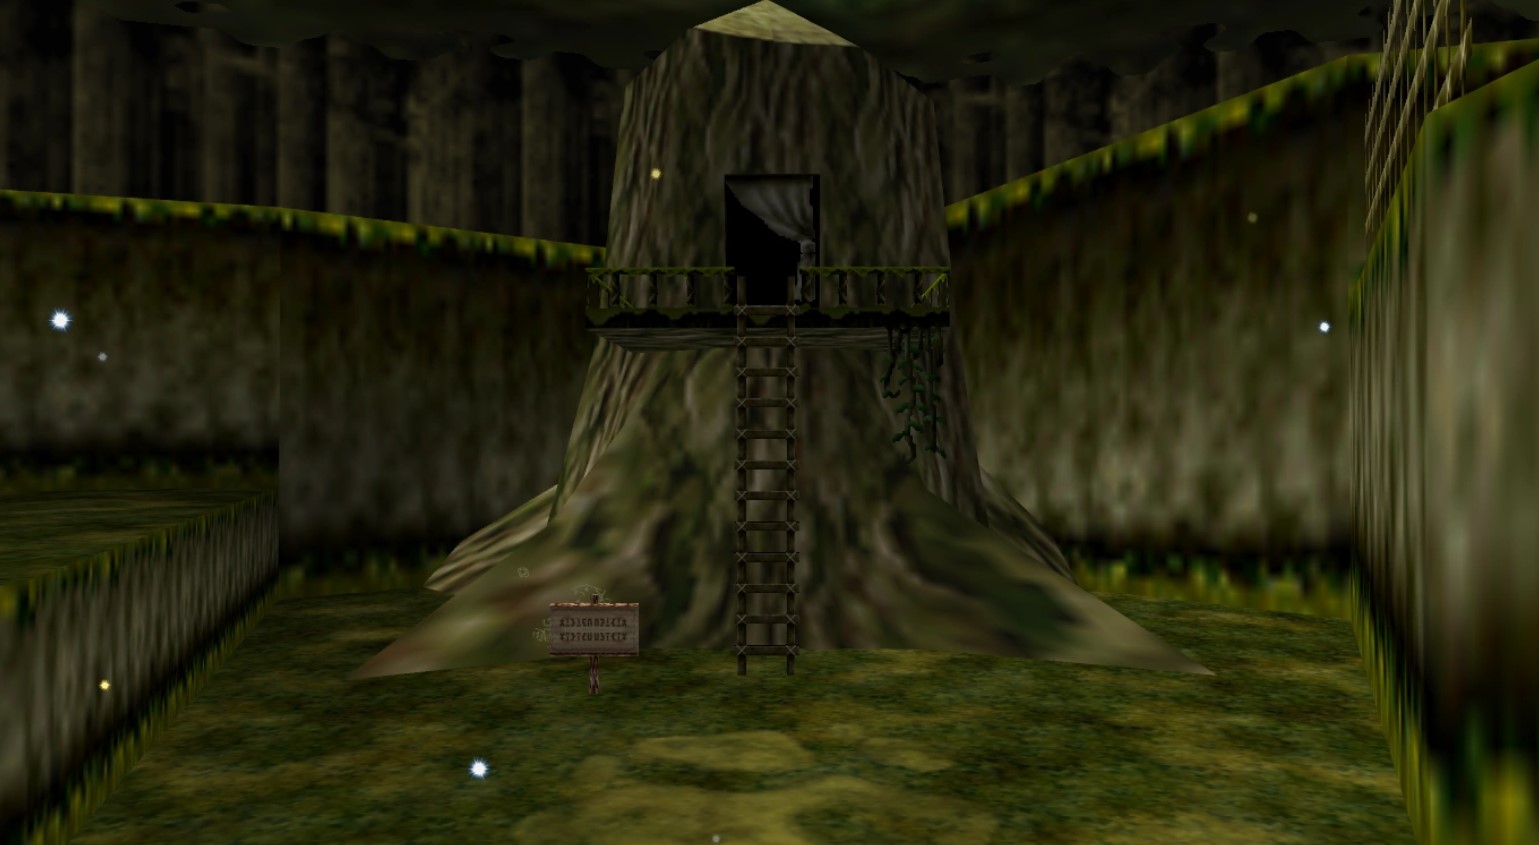 Link's treehouse in Ocarina of Time